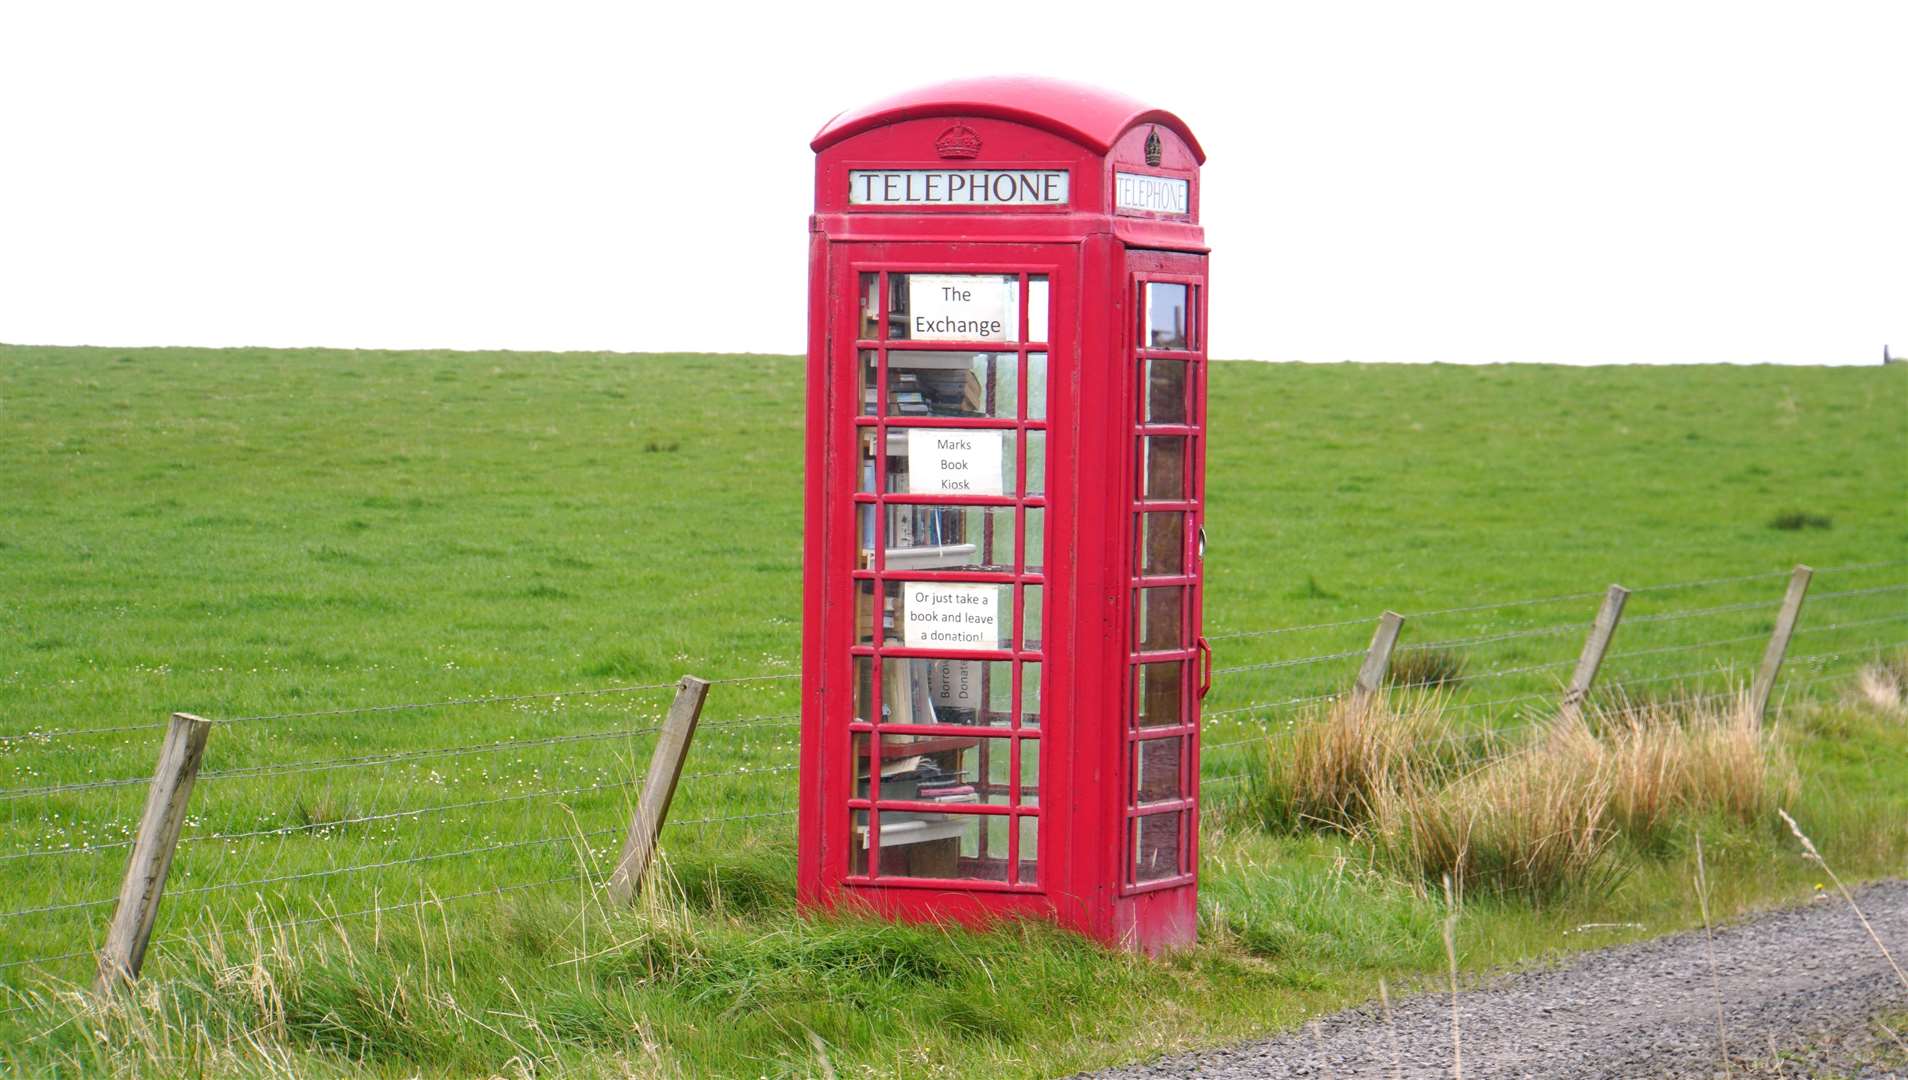 Some redundant phone boxes have been repurposed, such as this one which has been turned into a library.